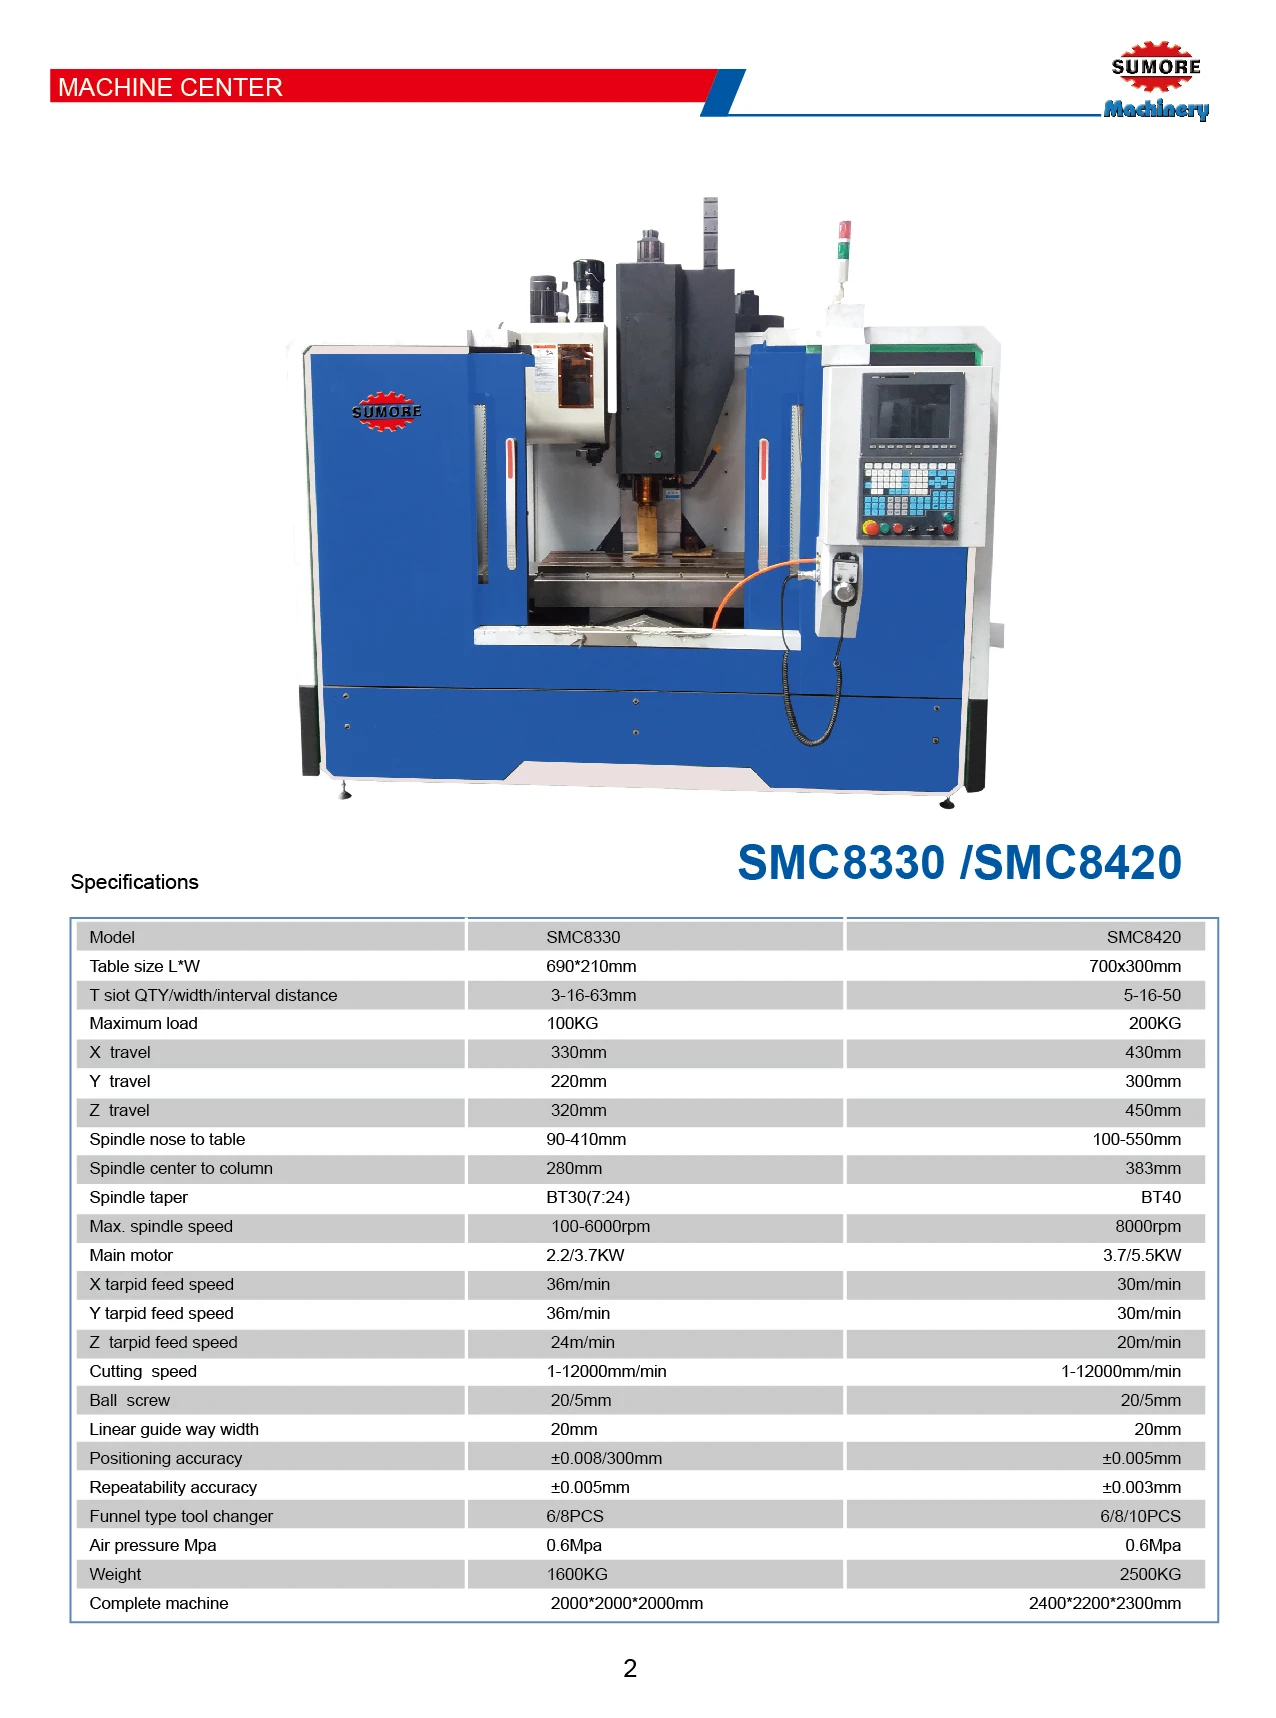 Japanese and Taiwan Made Quality!! mill machining center SMC8650 vmc 855